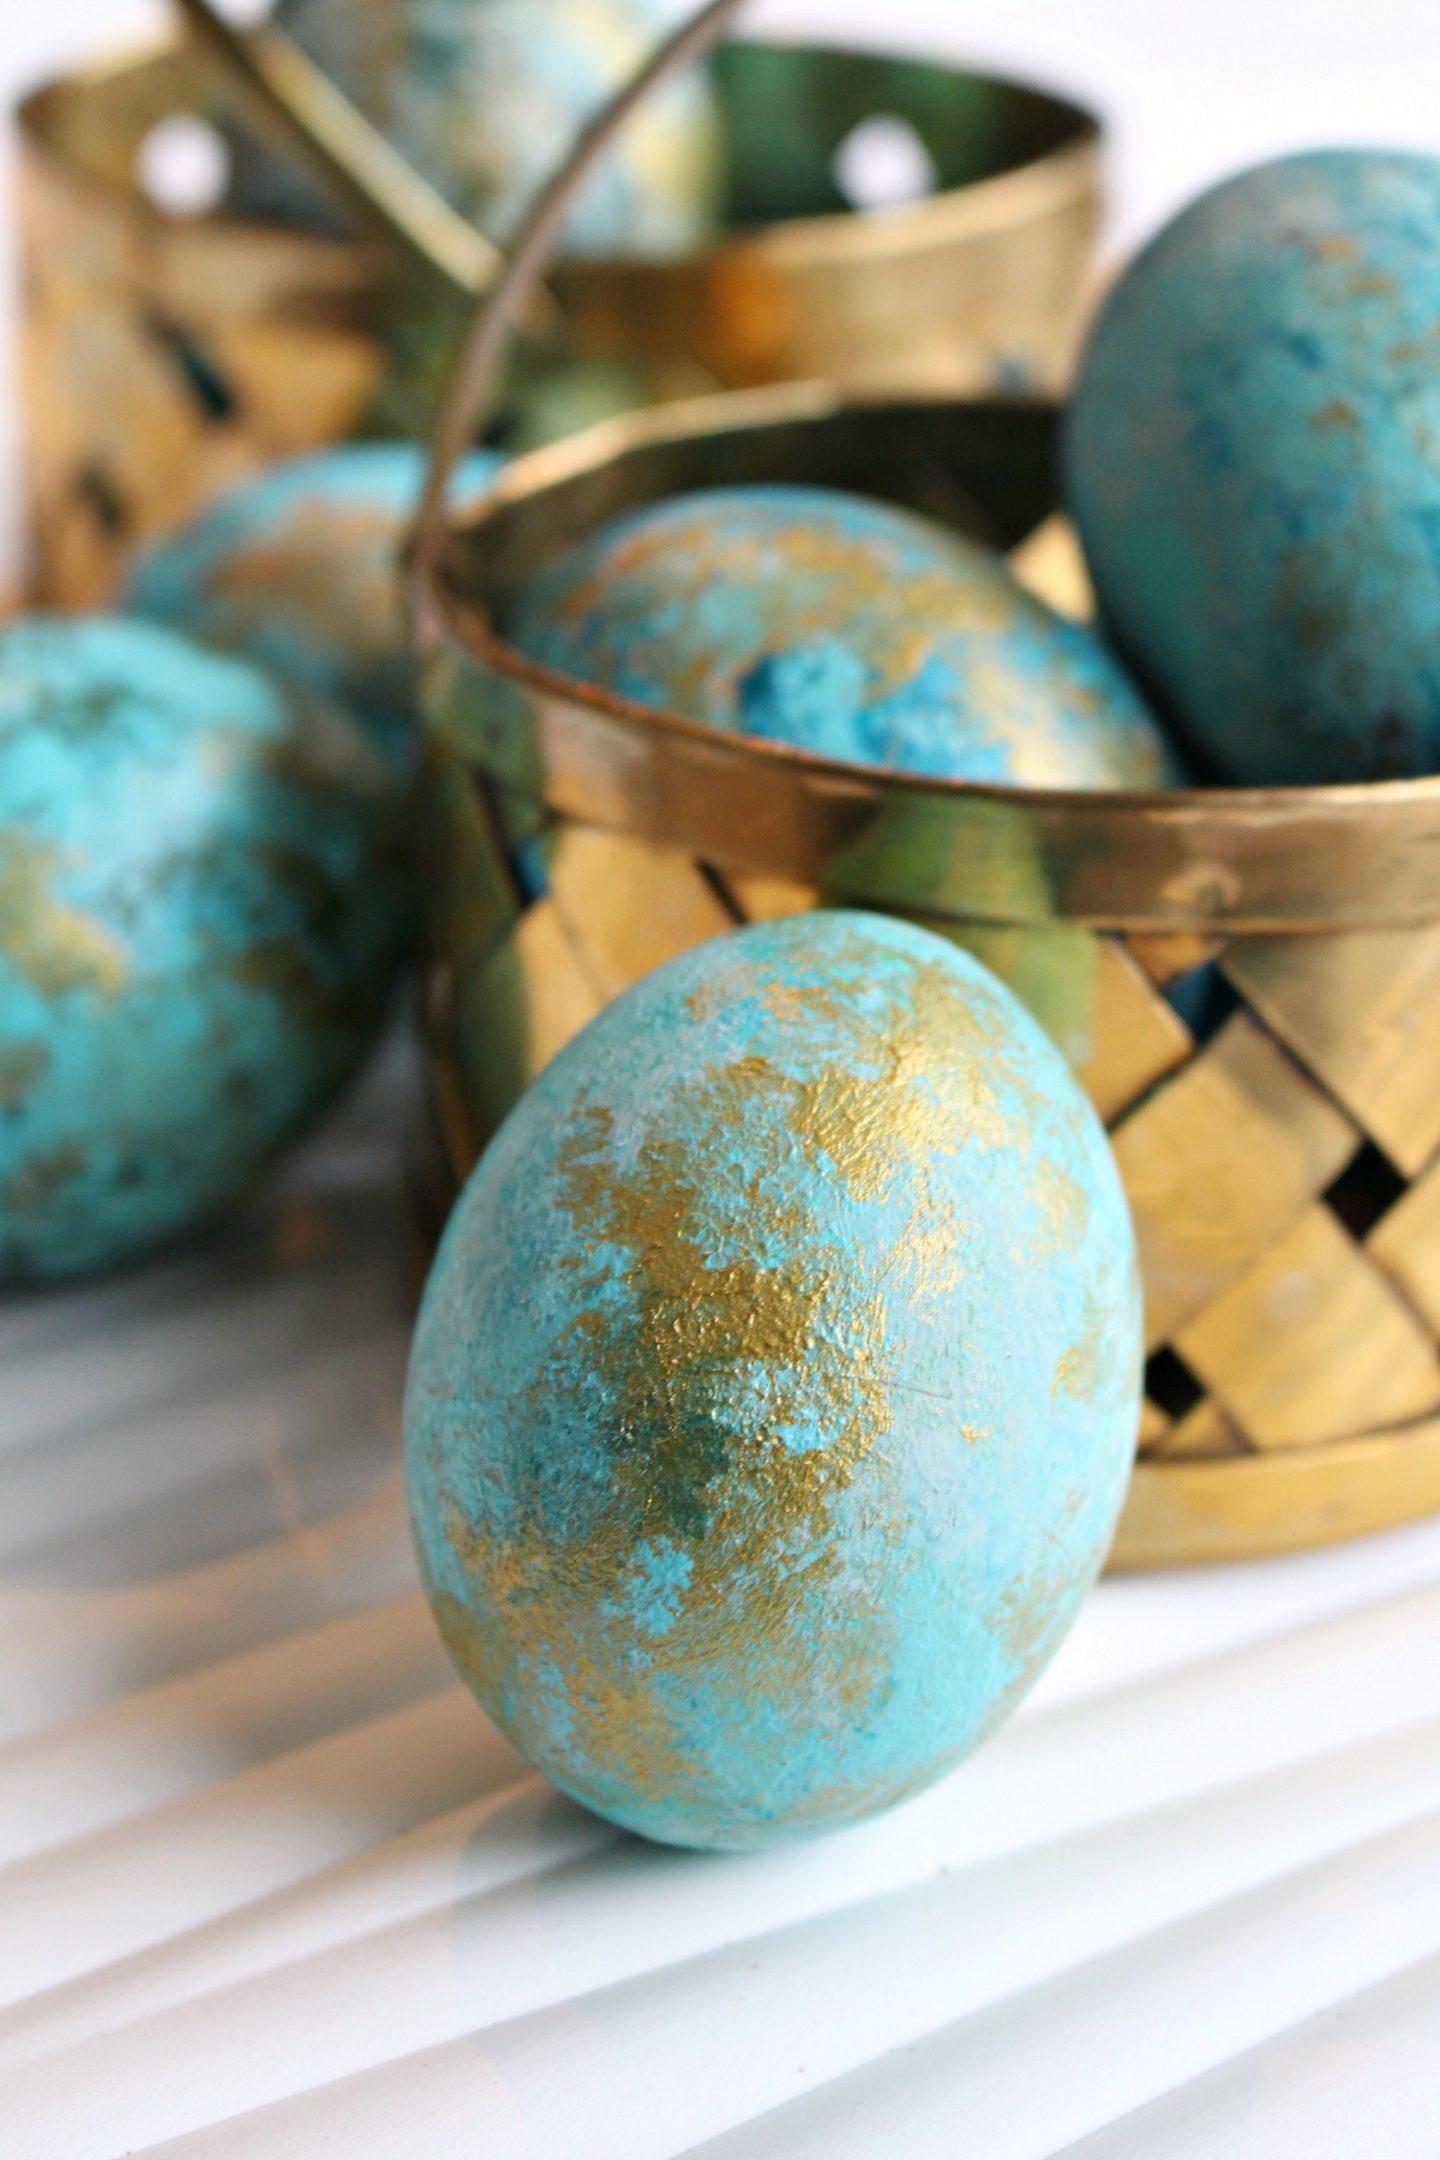 Abstract Painted Easter Eggs | Creative Egg Decorating